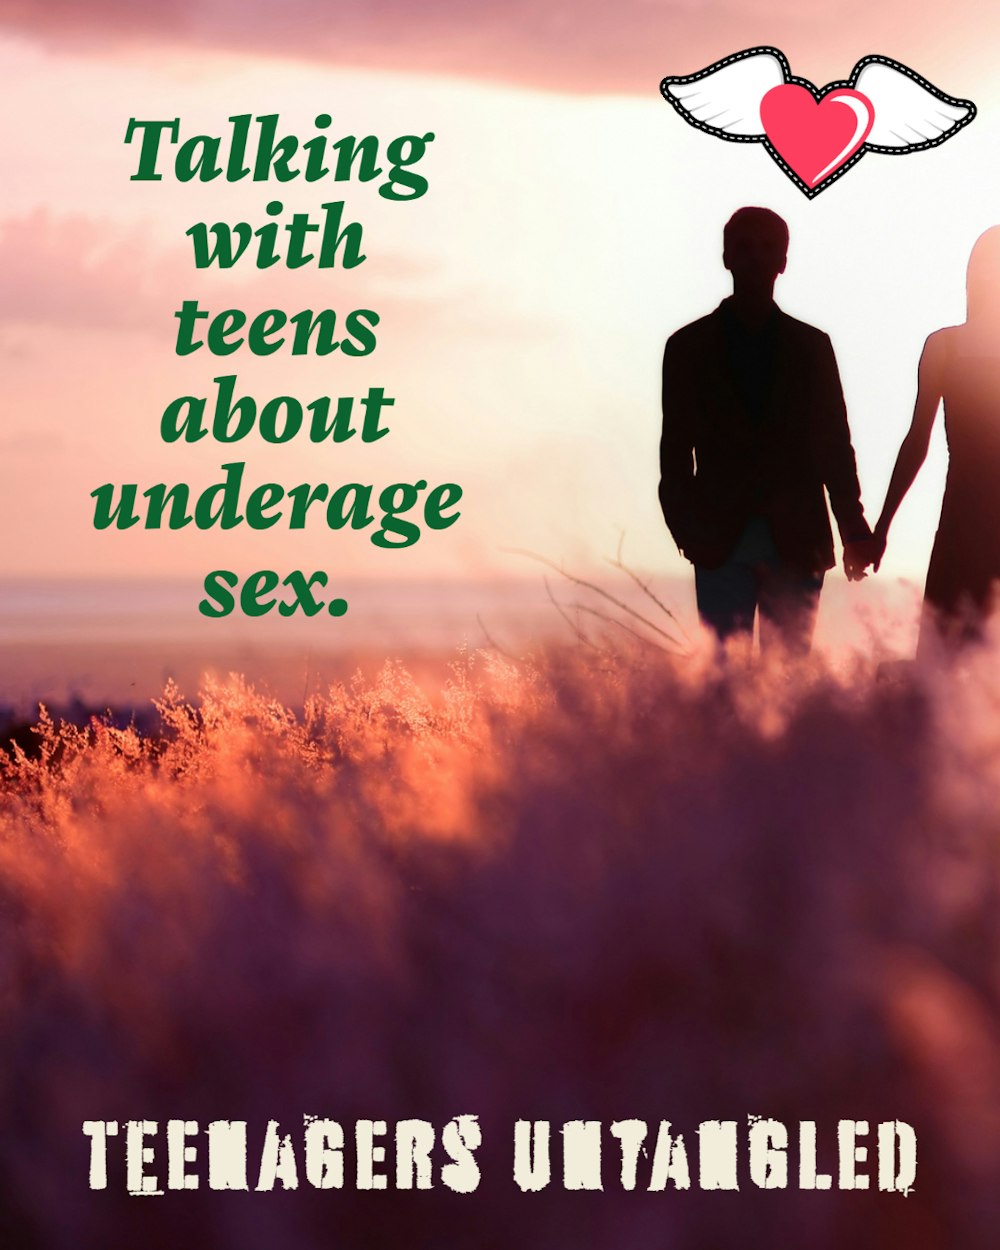 It might be illegal, but when did that ever stop a teenager?